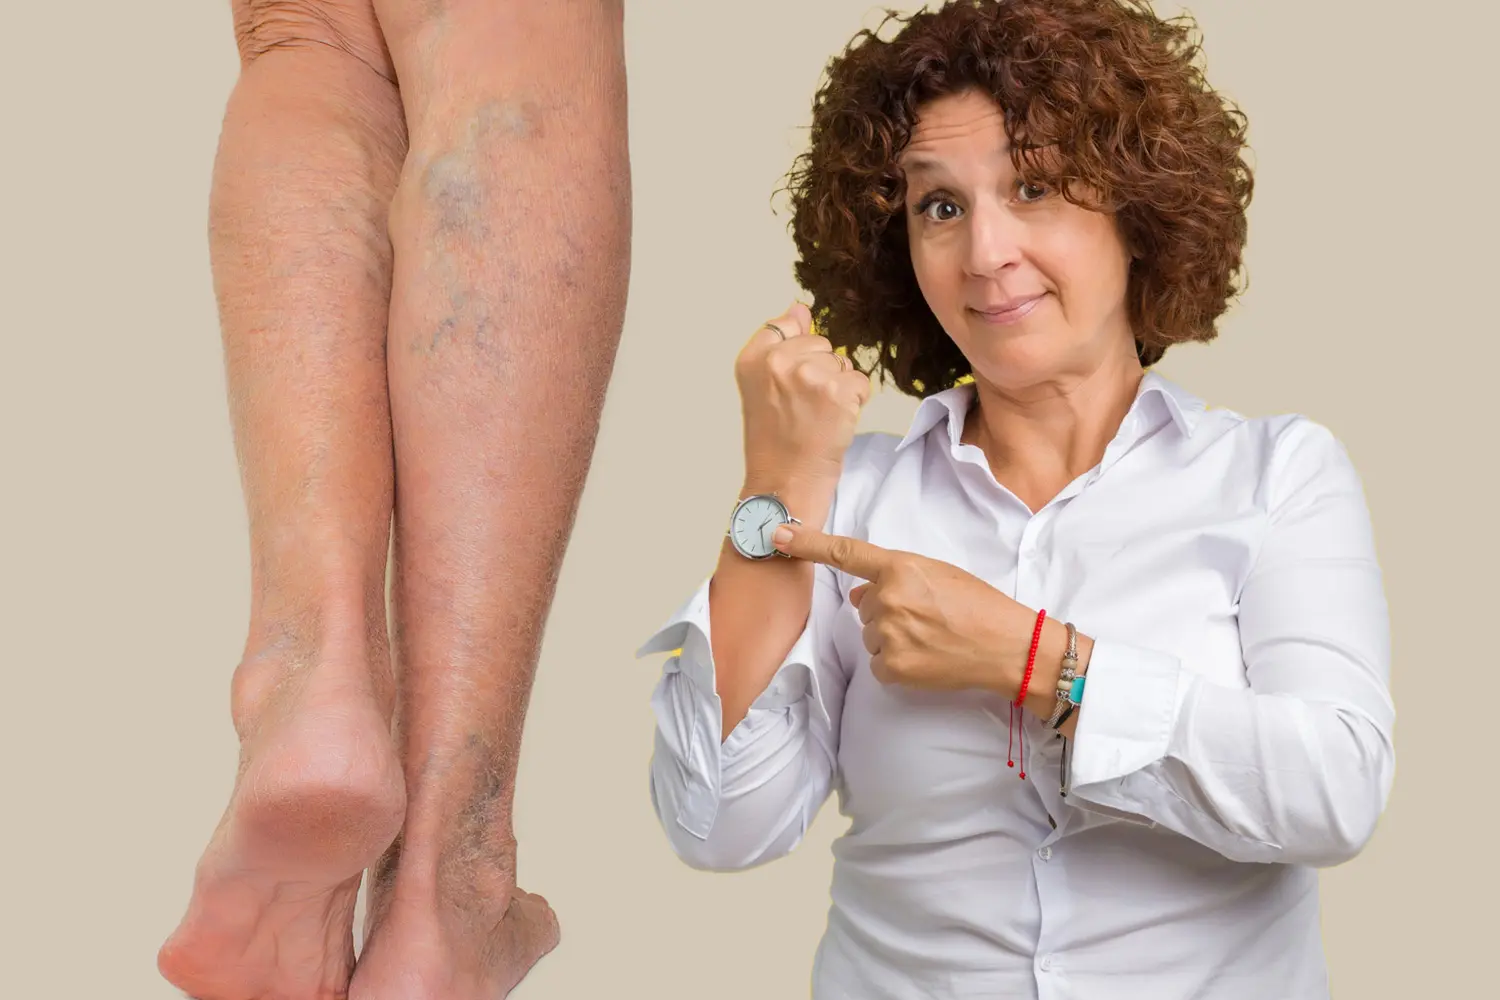 A woman pointing to her watch and showing a leg with varicose veins.